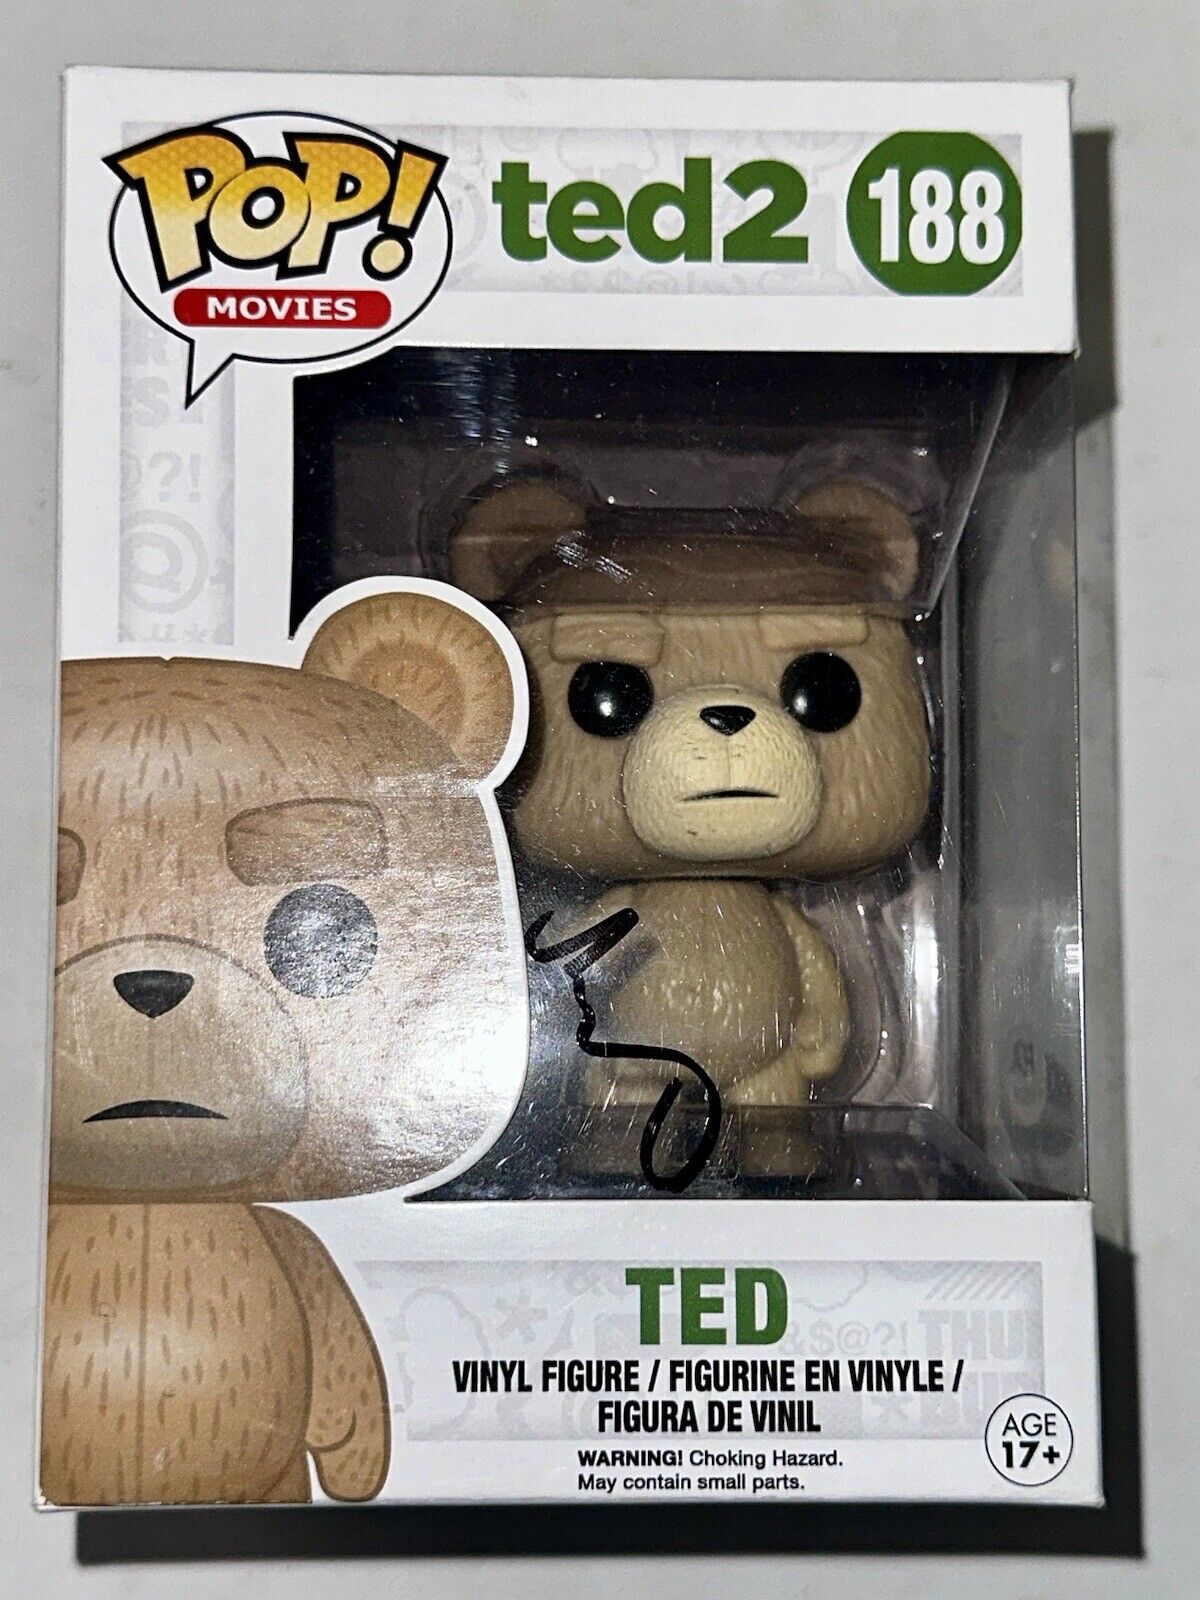 Mark Wahlberg Signed Ted 2 With Beer #188 Vaulted 2015 Funko Pop With PSA COA